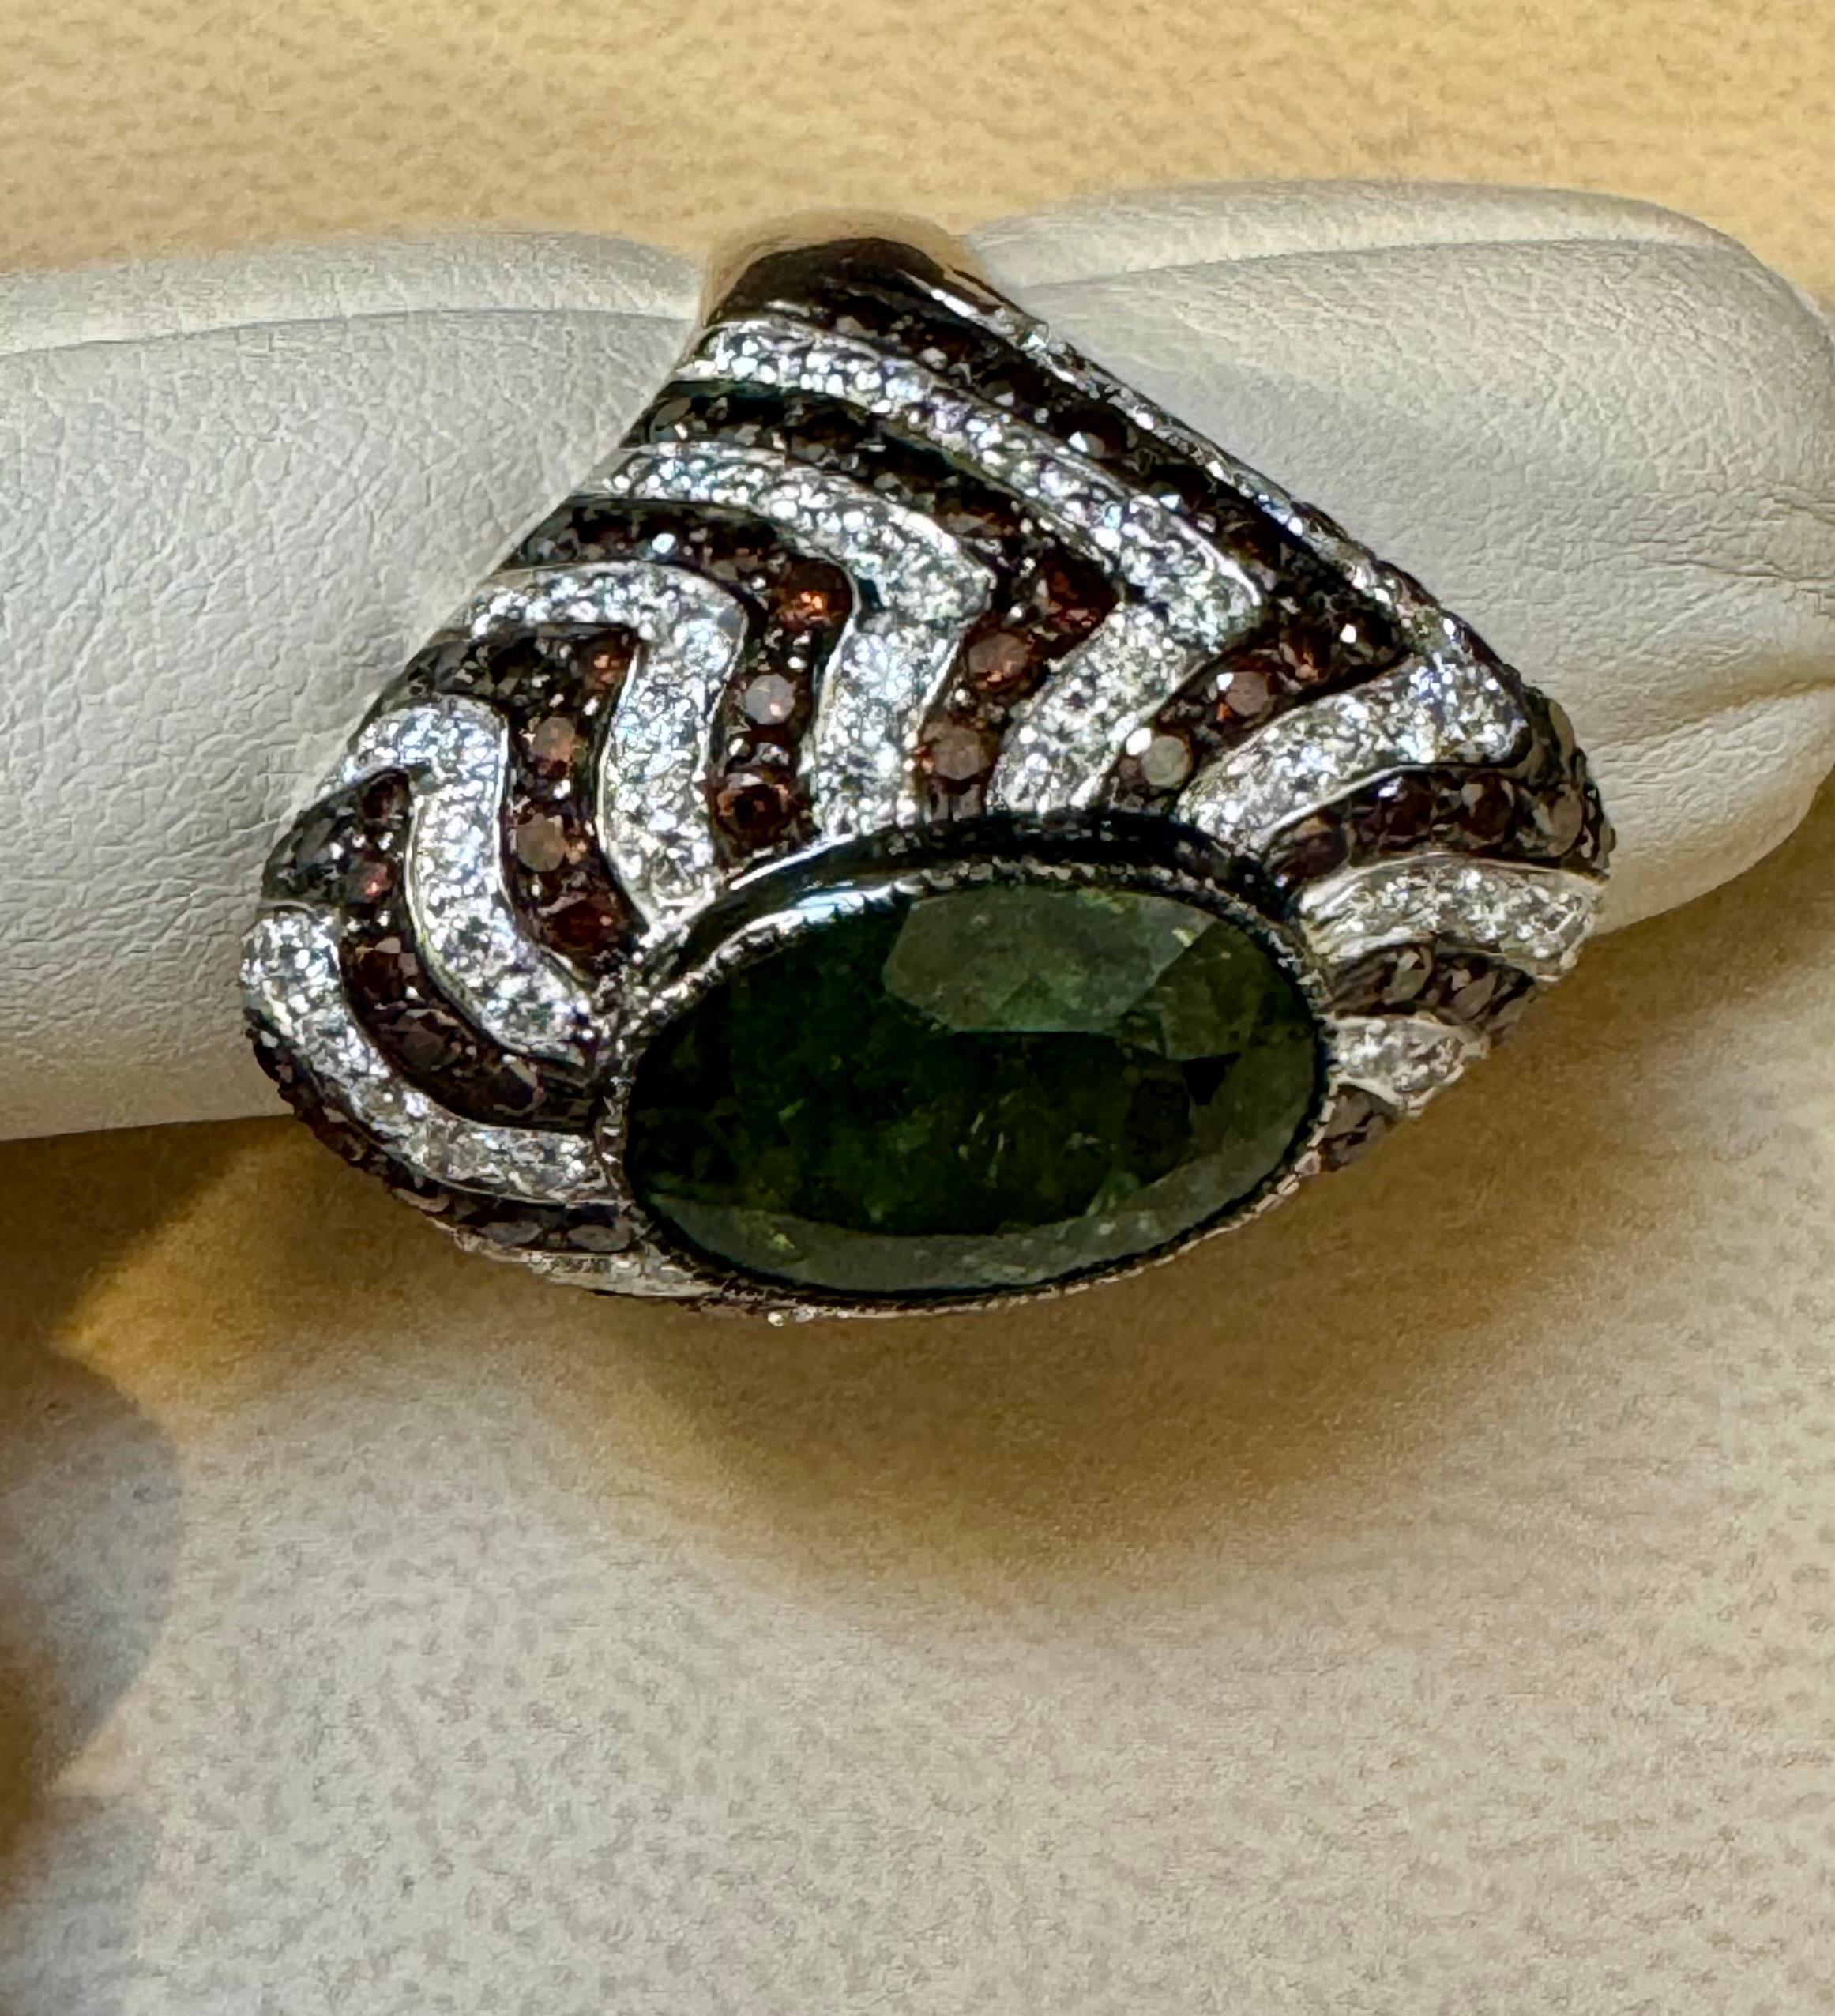 10 Ct Green Tourmaline & 4.2 Ct Diamond Zigzag Cocktail Ring 18 Kt White Gold Size  6.5
This spectacular Cocktail ring   consisting of a single Oval  Shape Green Tourmaline  approximately 10  Carat.  The  Green Tourmaline  is surrounded by